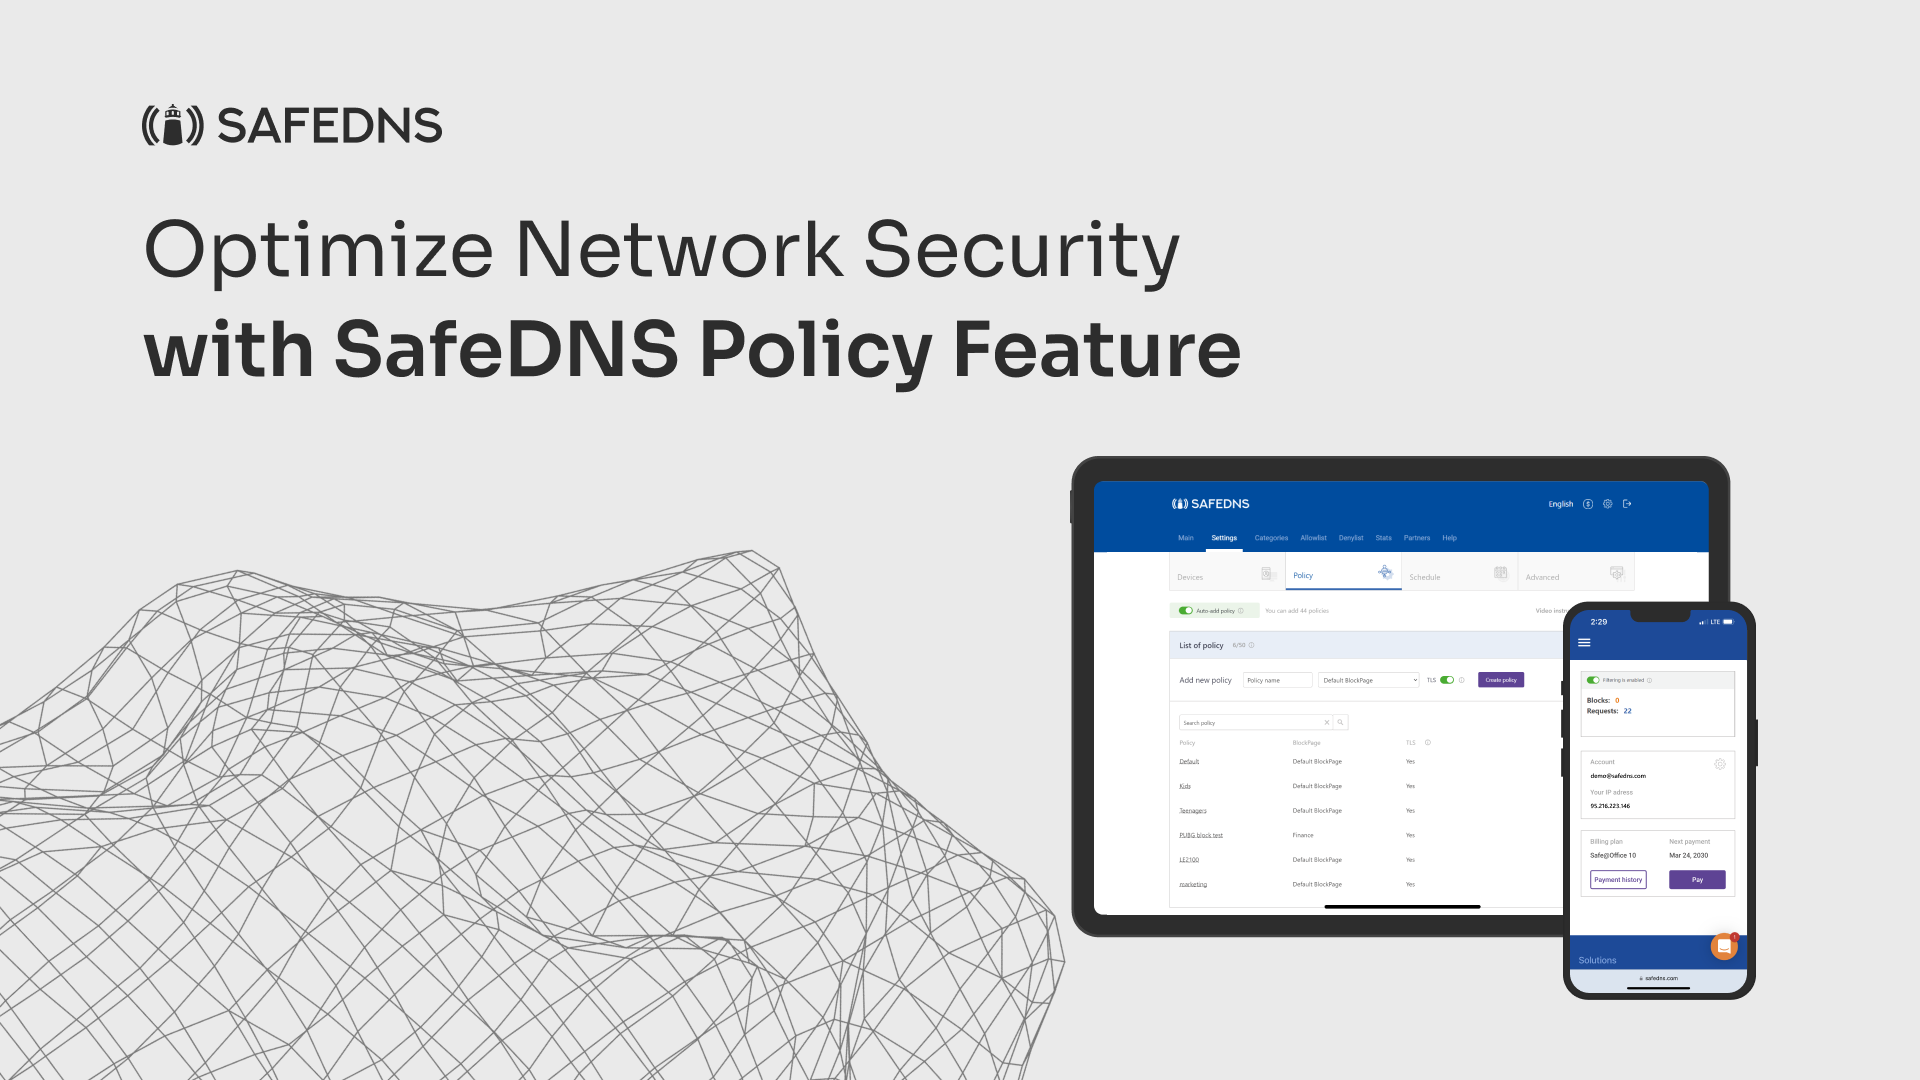 Optimize Network Security with SafeDNS Policy Feature